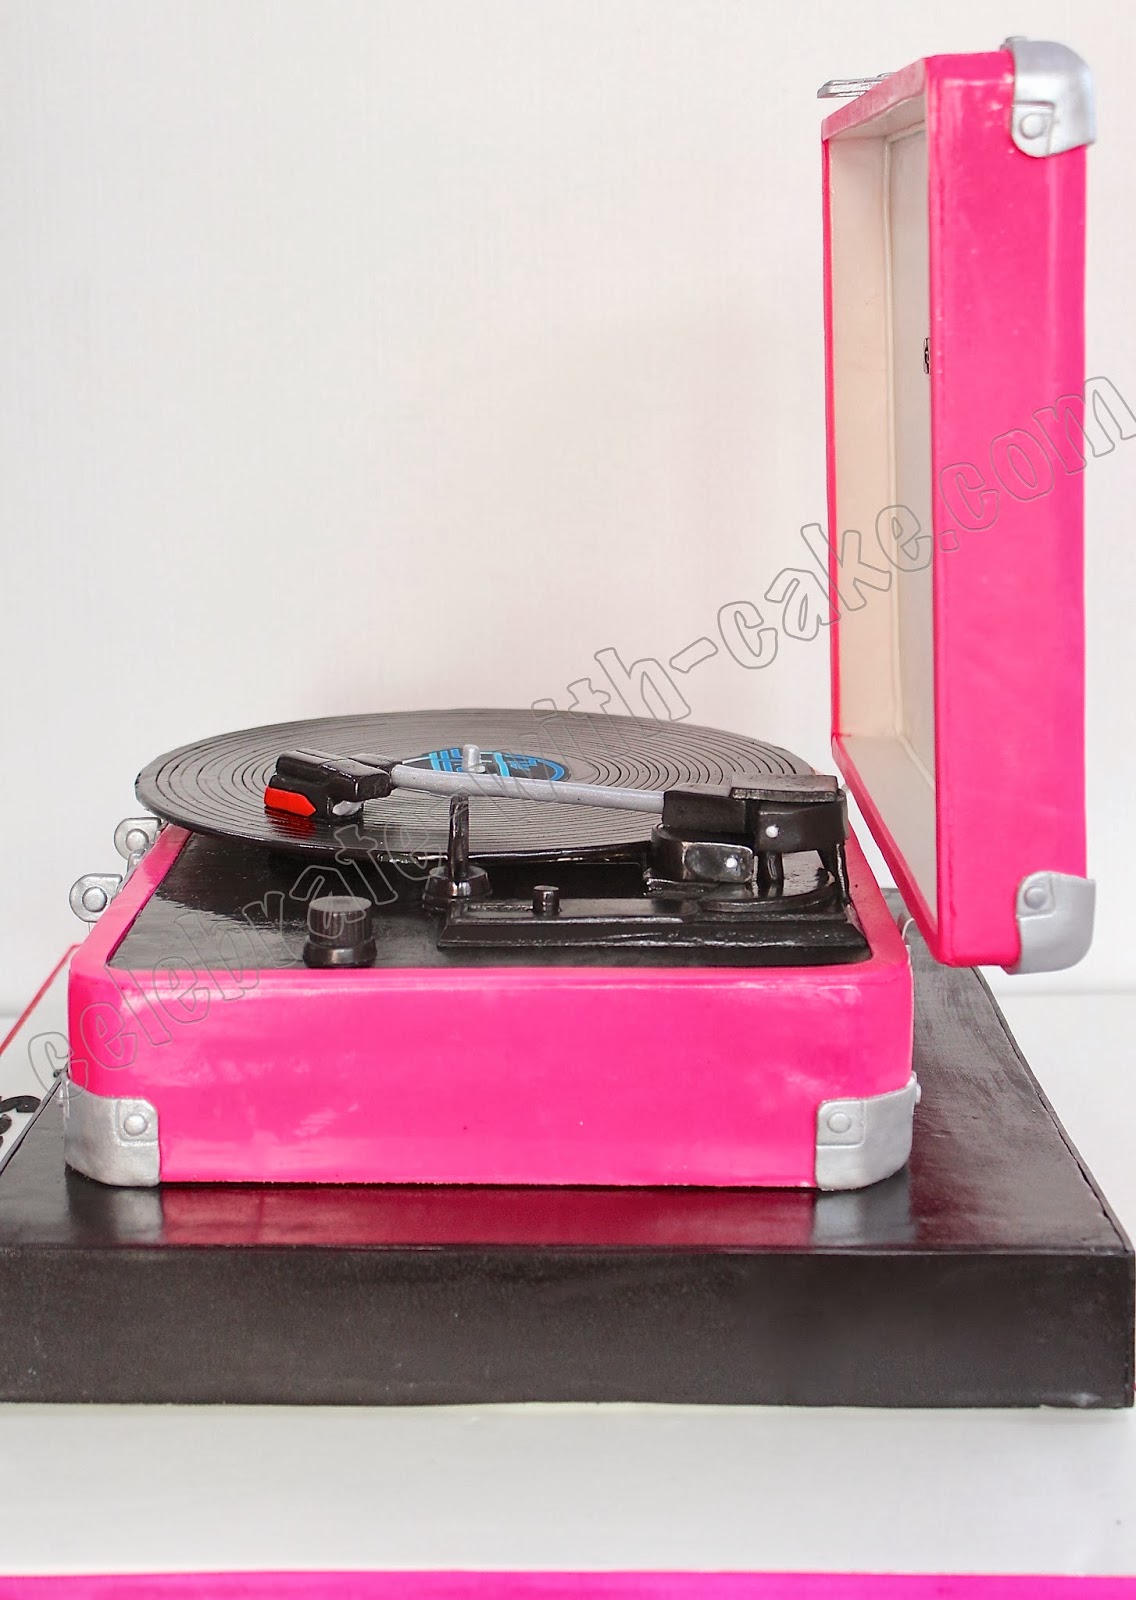 Celebrate With Cake 3d Sculpted Crosley Record Player 21st